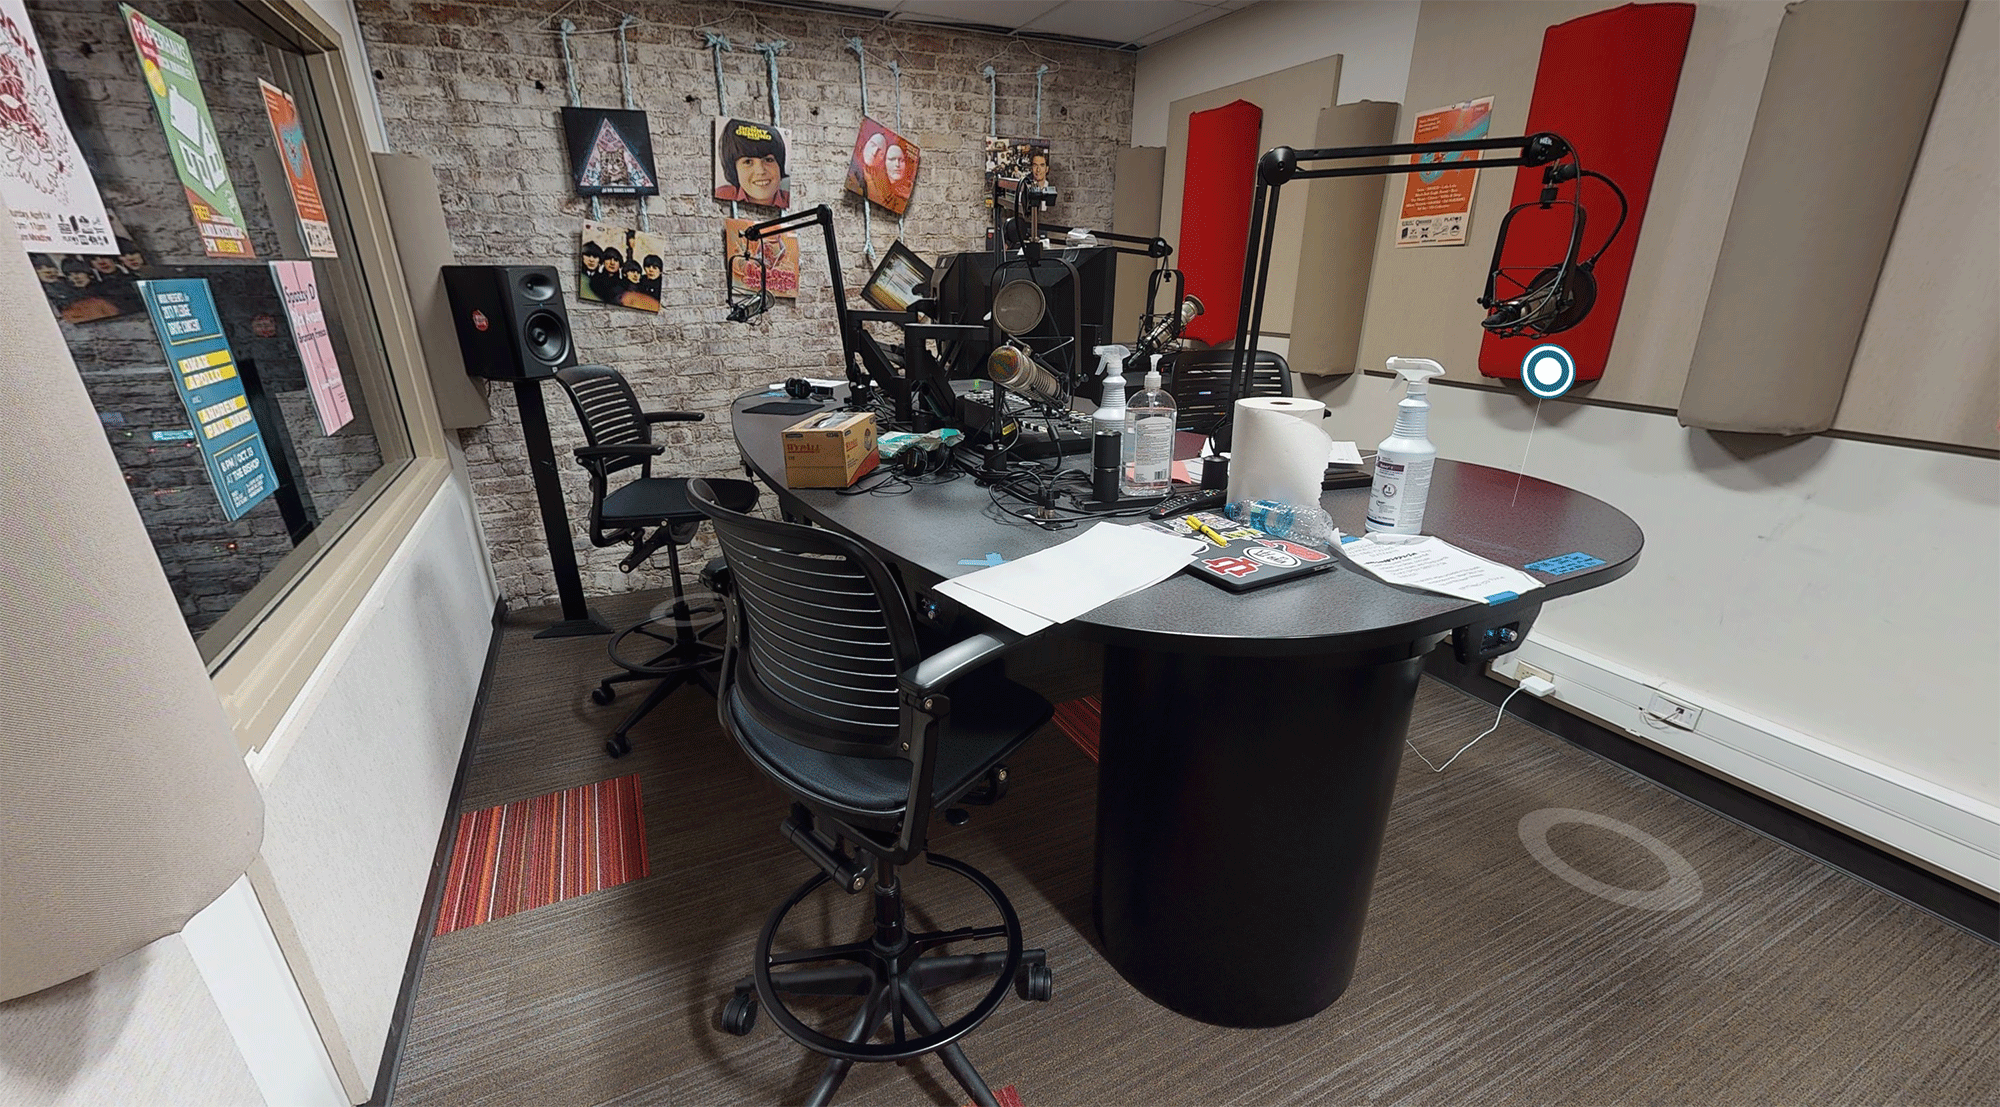 Photograph of the WIUX radio station studio with a large black desk and recording equipment.